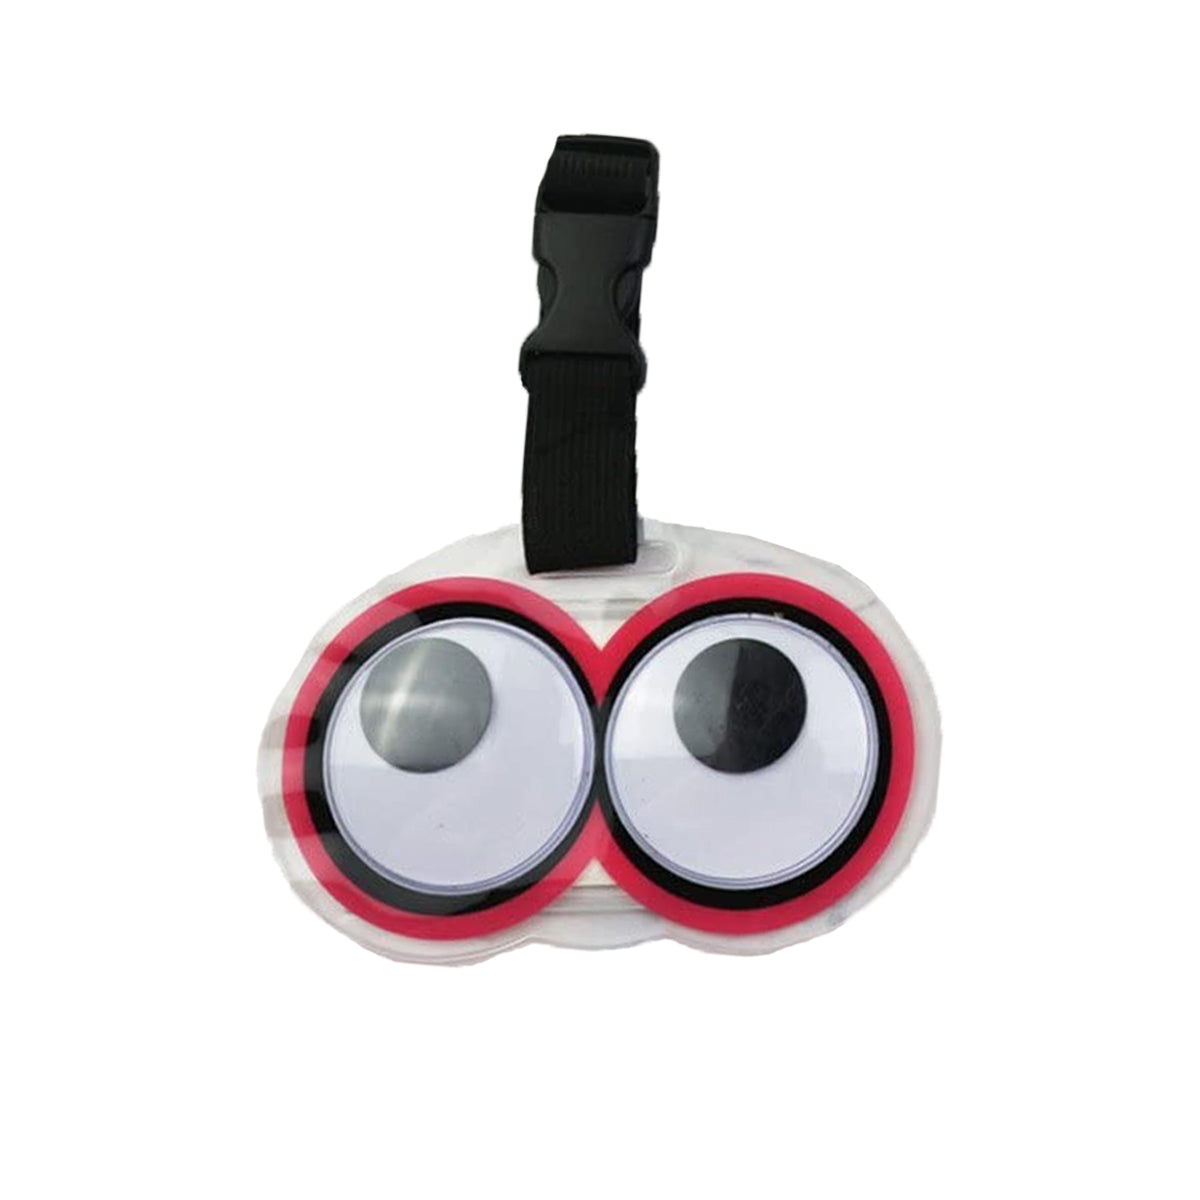 Googly Eyes Luggage Tags – Fun Way To Find Suitcase & Travel Bags